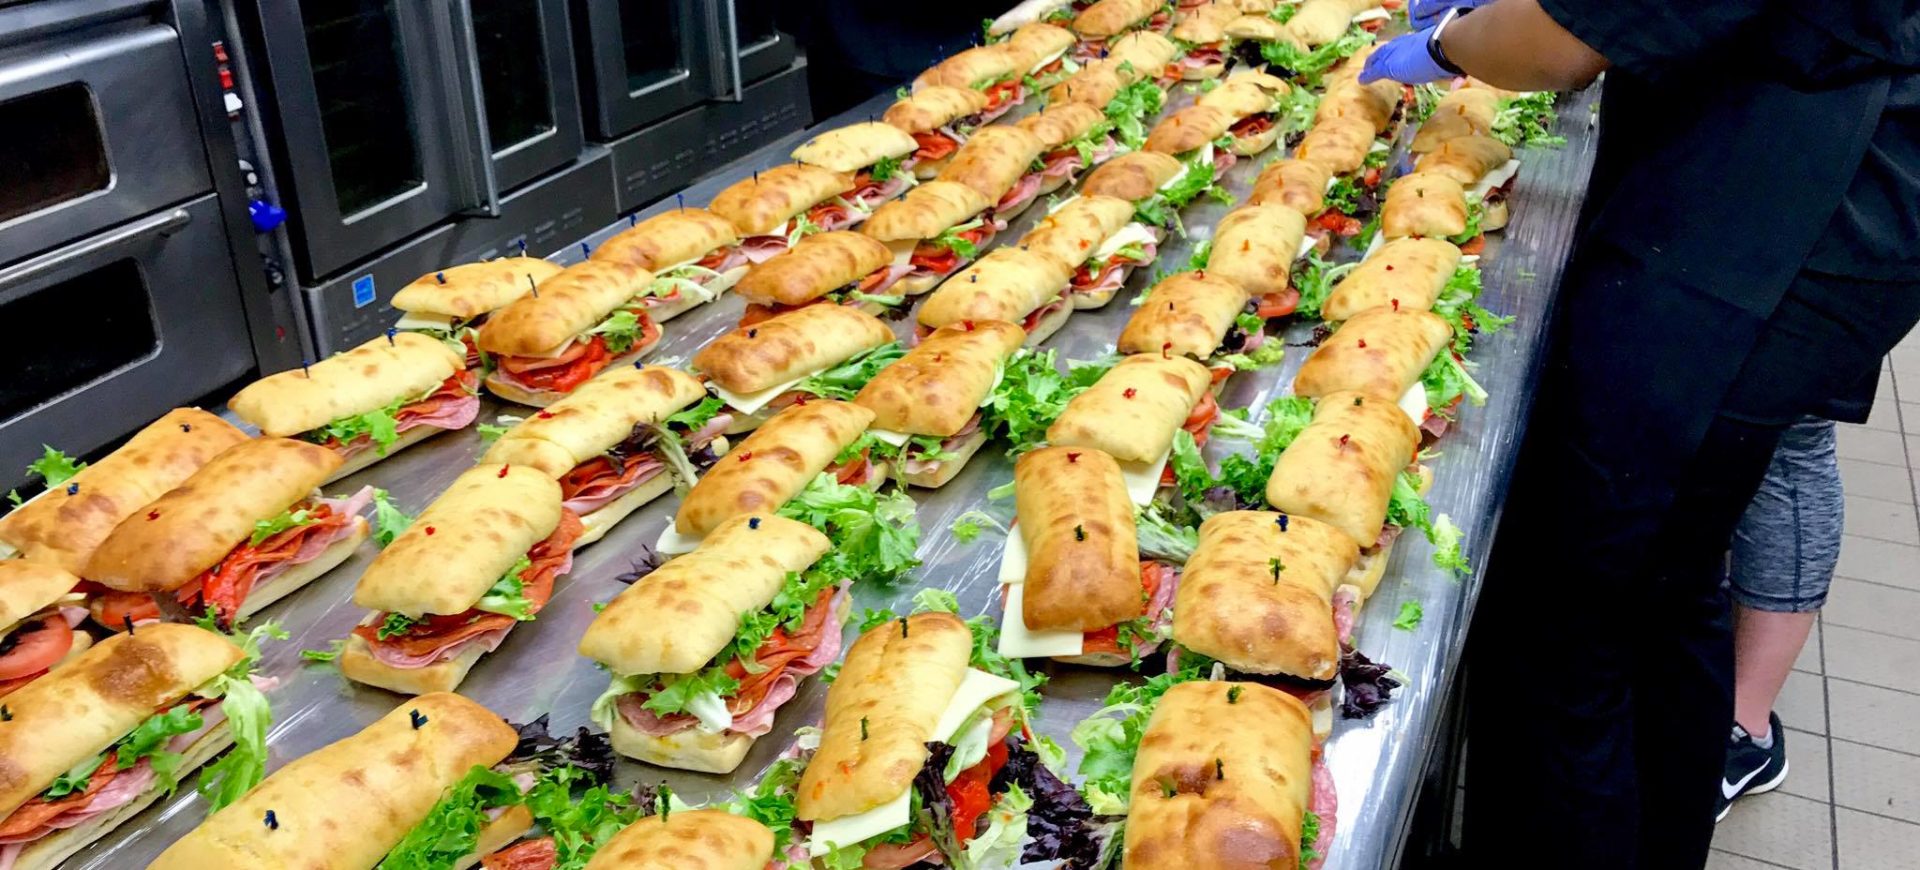 sandwiches in production at Normandy Catering